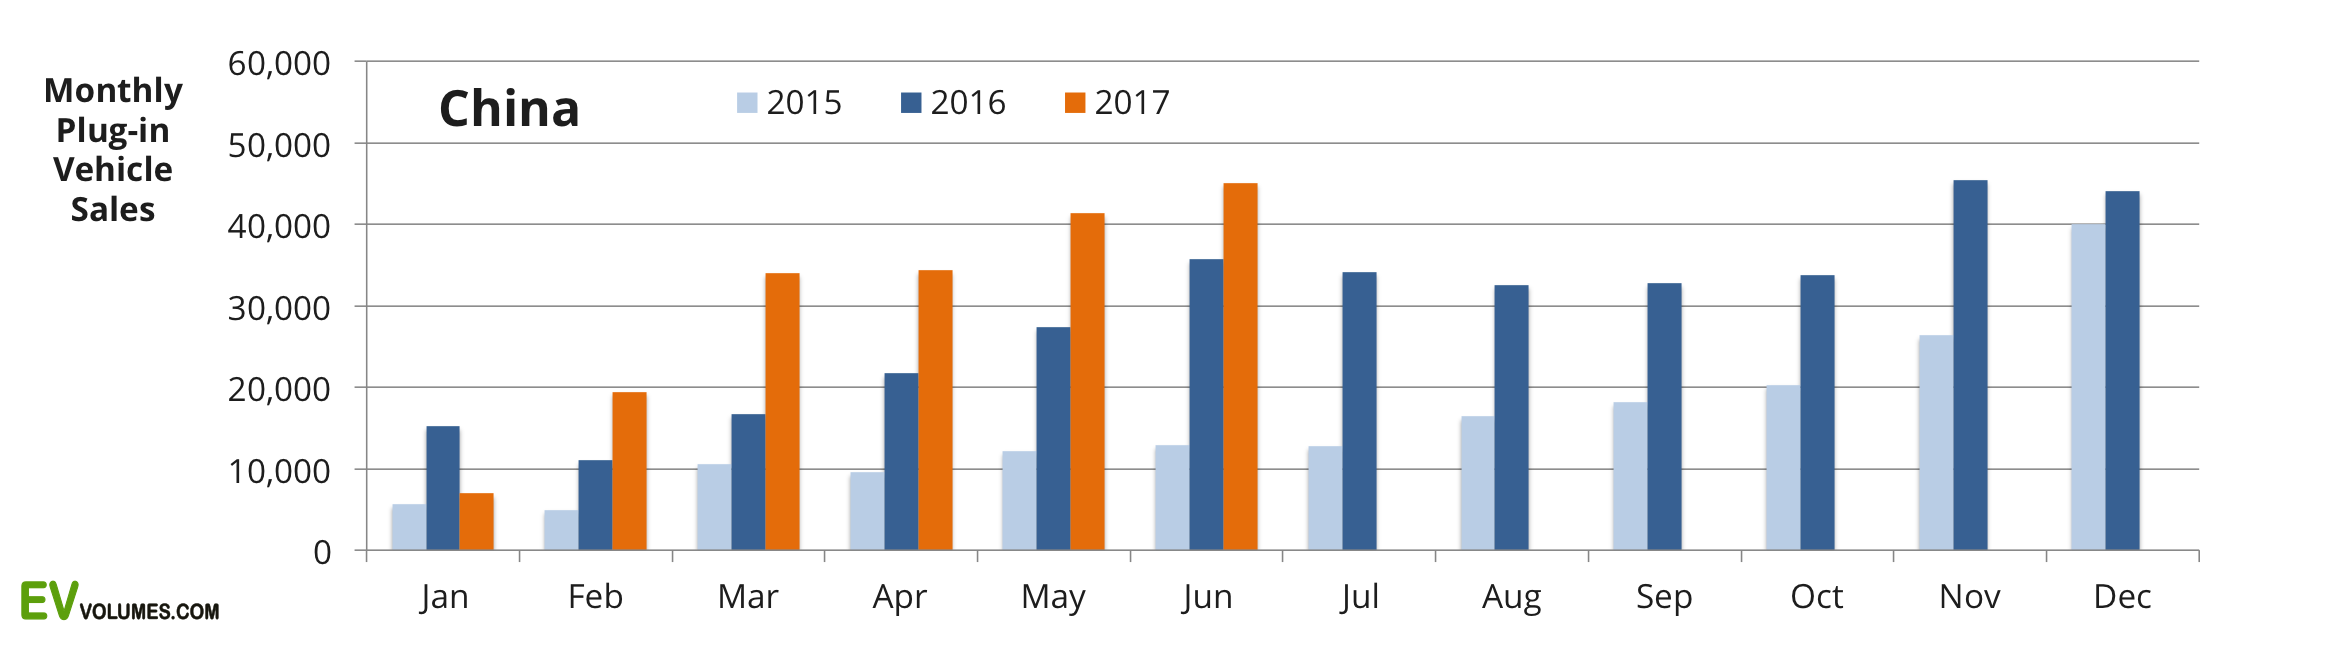 China Monthly Electric Vehicle Sales By Month Seeking Alpha